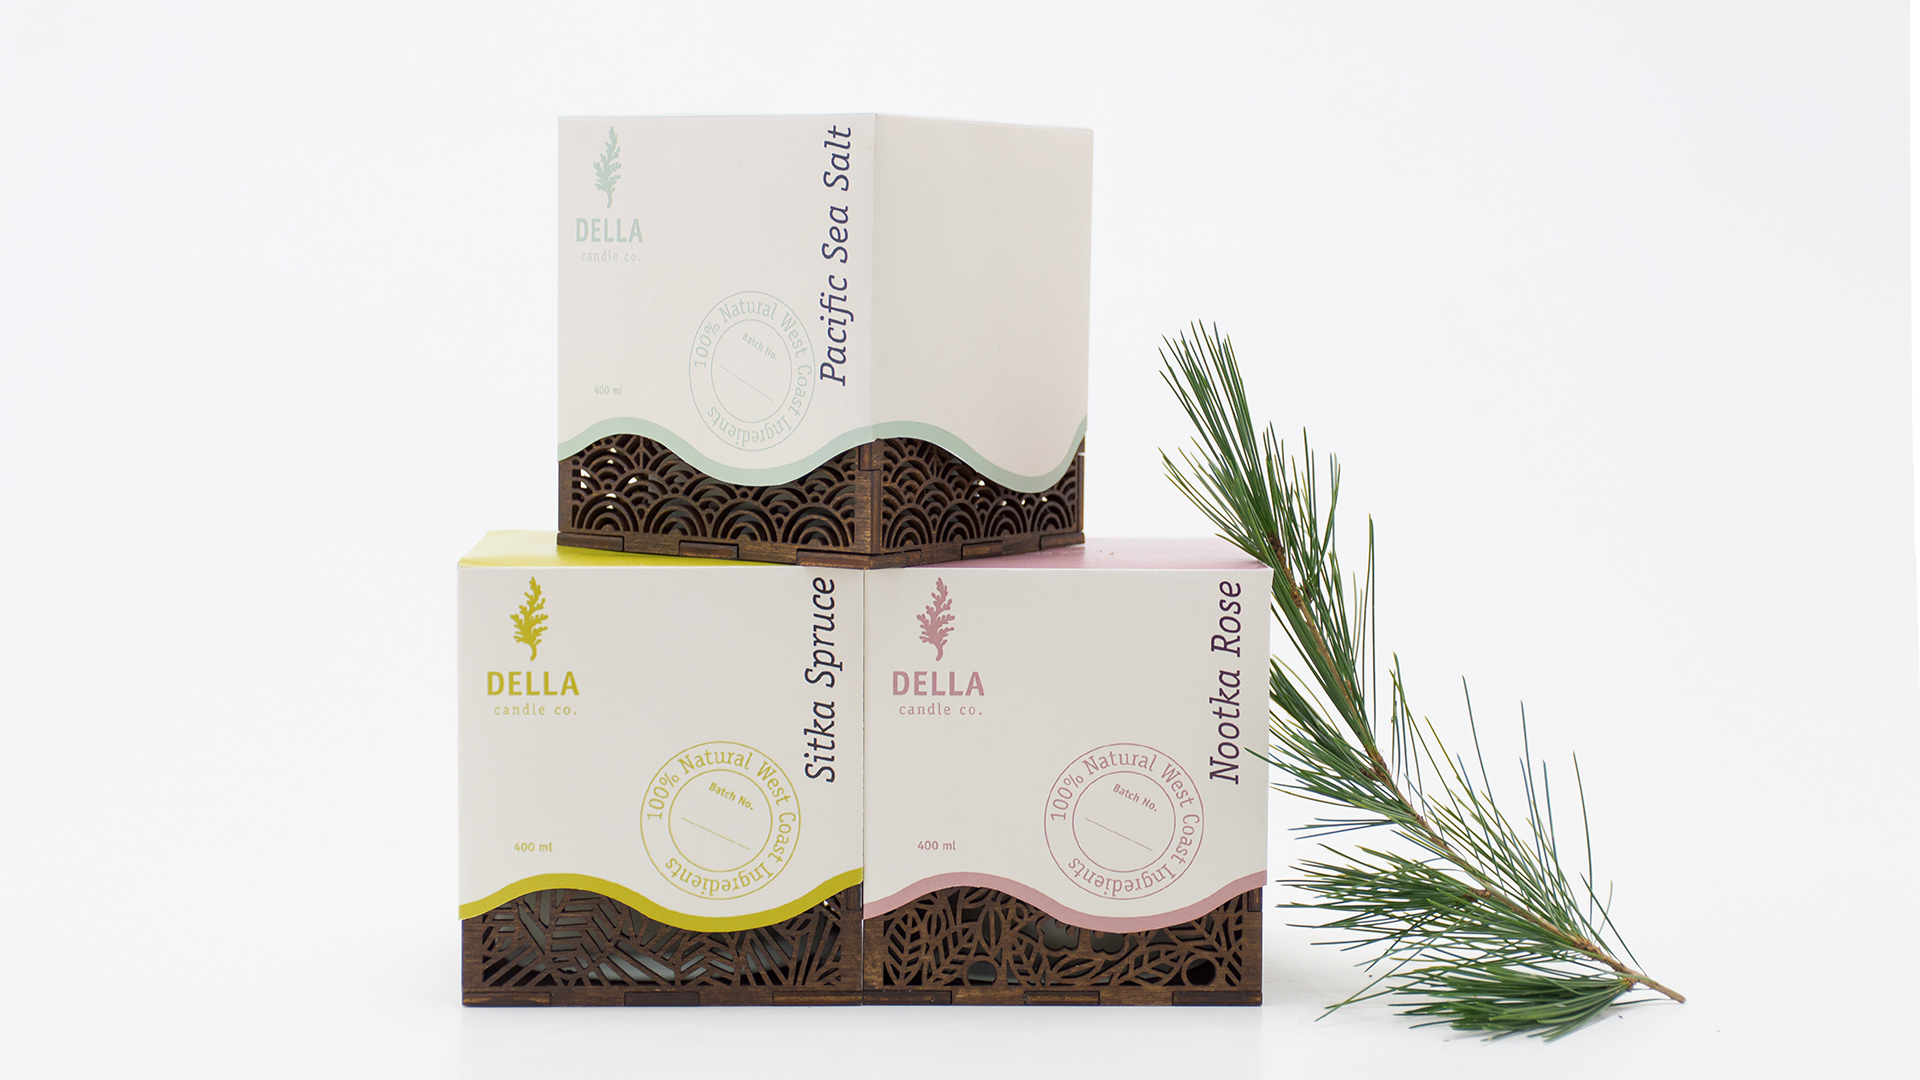 Rachel Sanvido | Identity | Della is a West Coast candle company that uses natural ingredients and materials